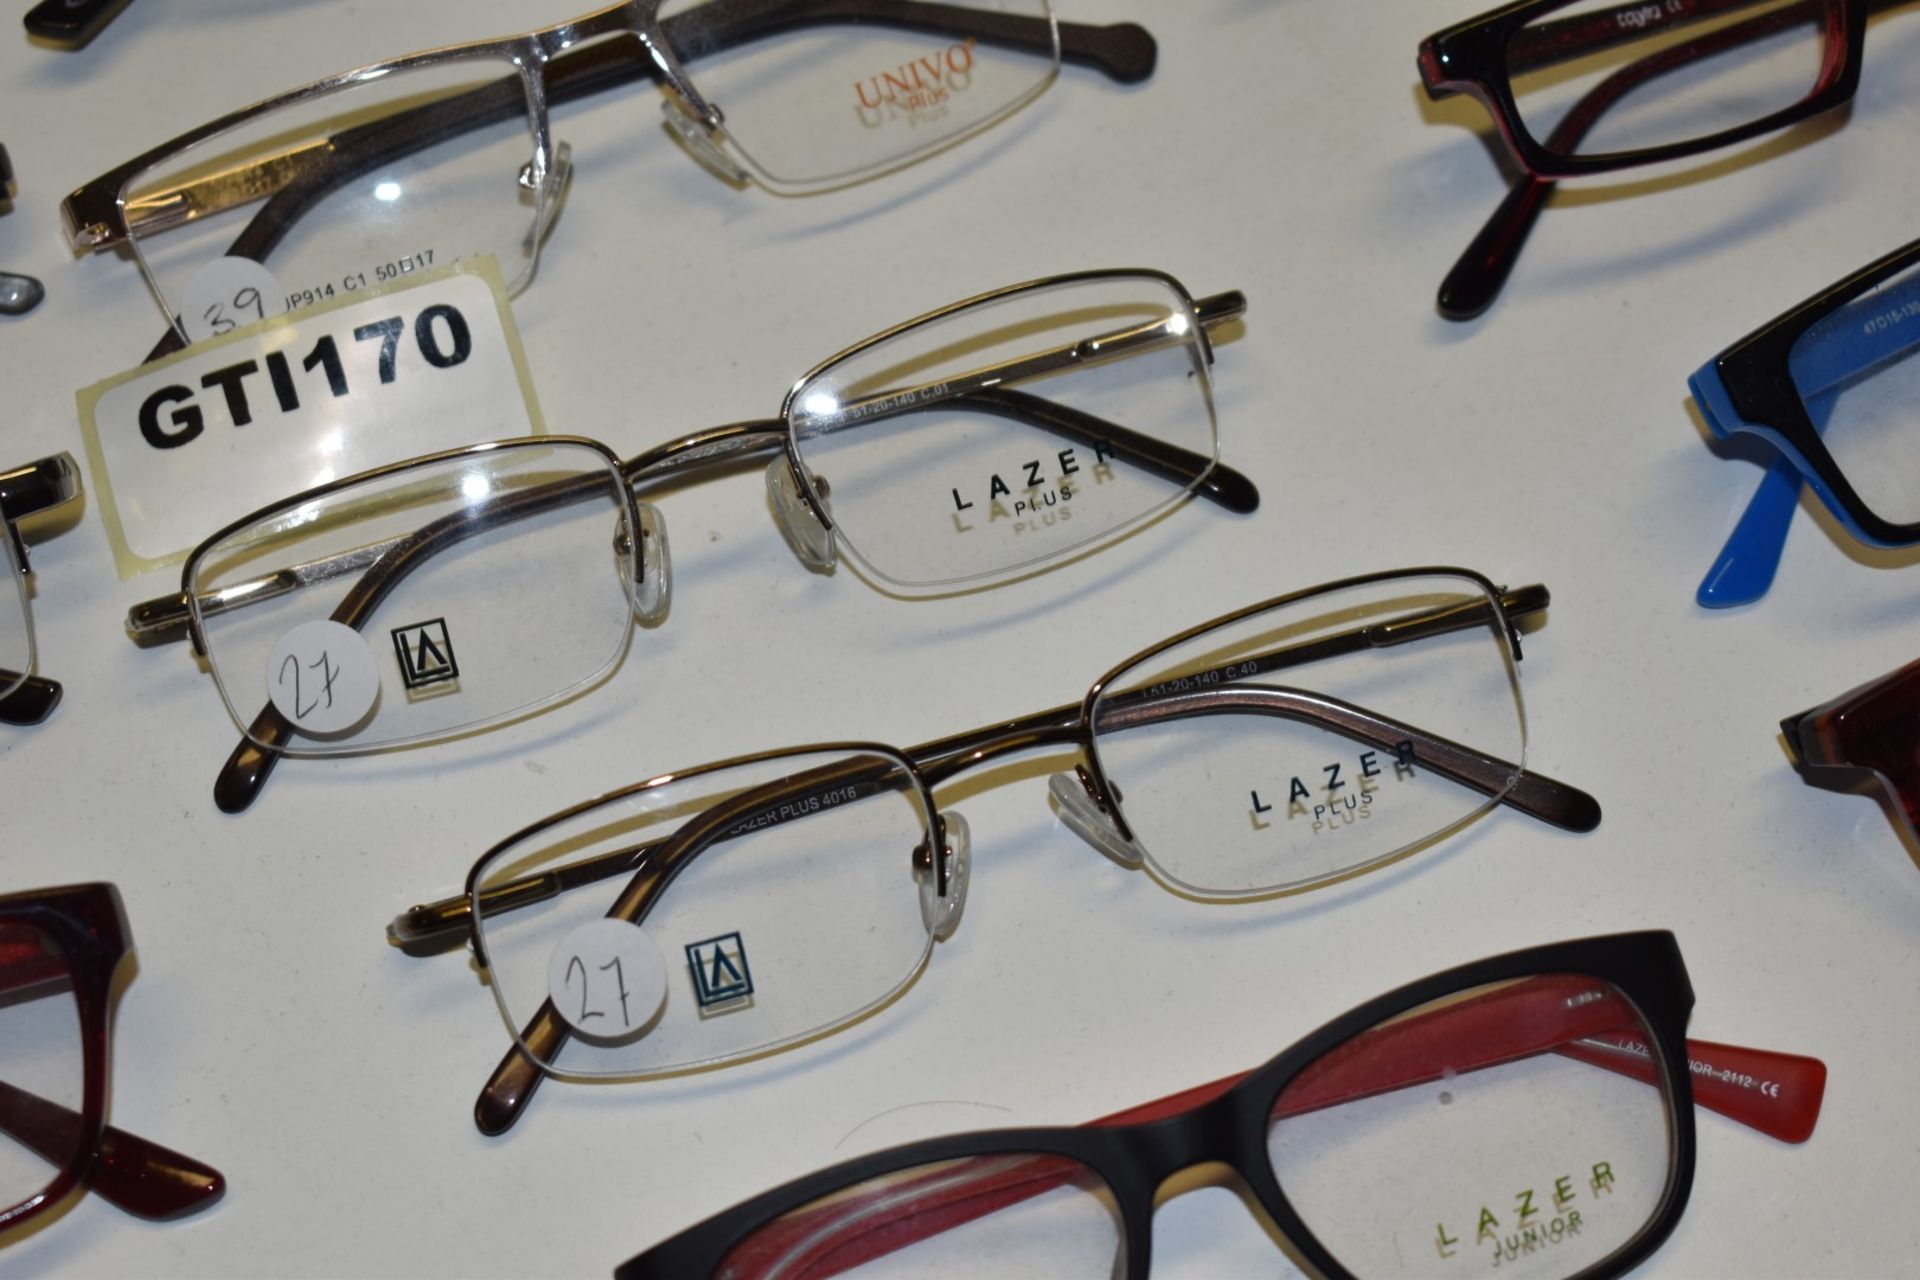 50 x Assorted Pairs of Spectacle Eye Glasses - New and Unused Stock - Various Designs and Brands - Image 10 of 15